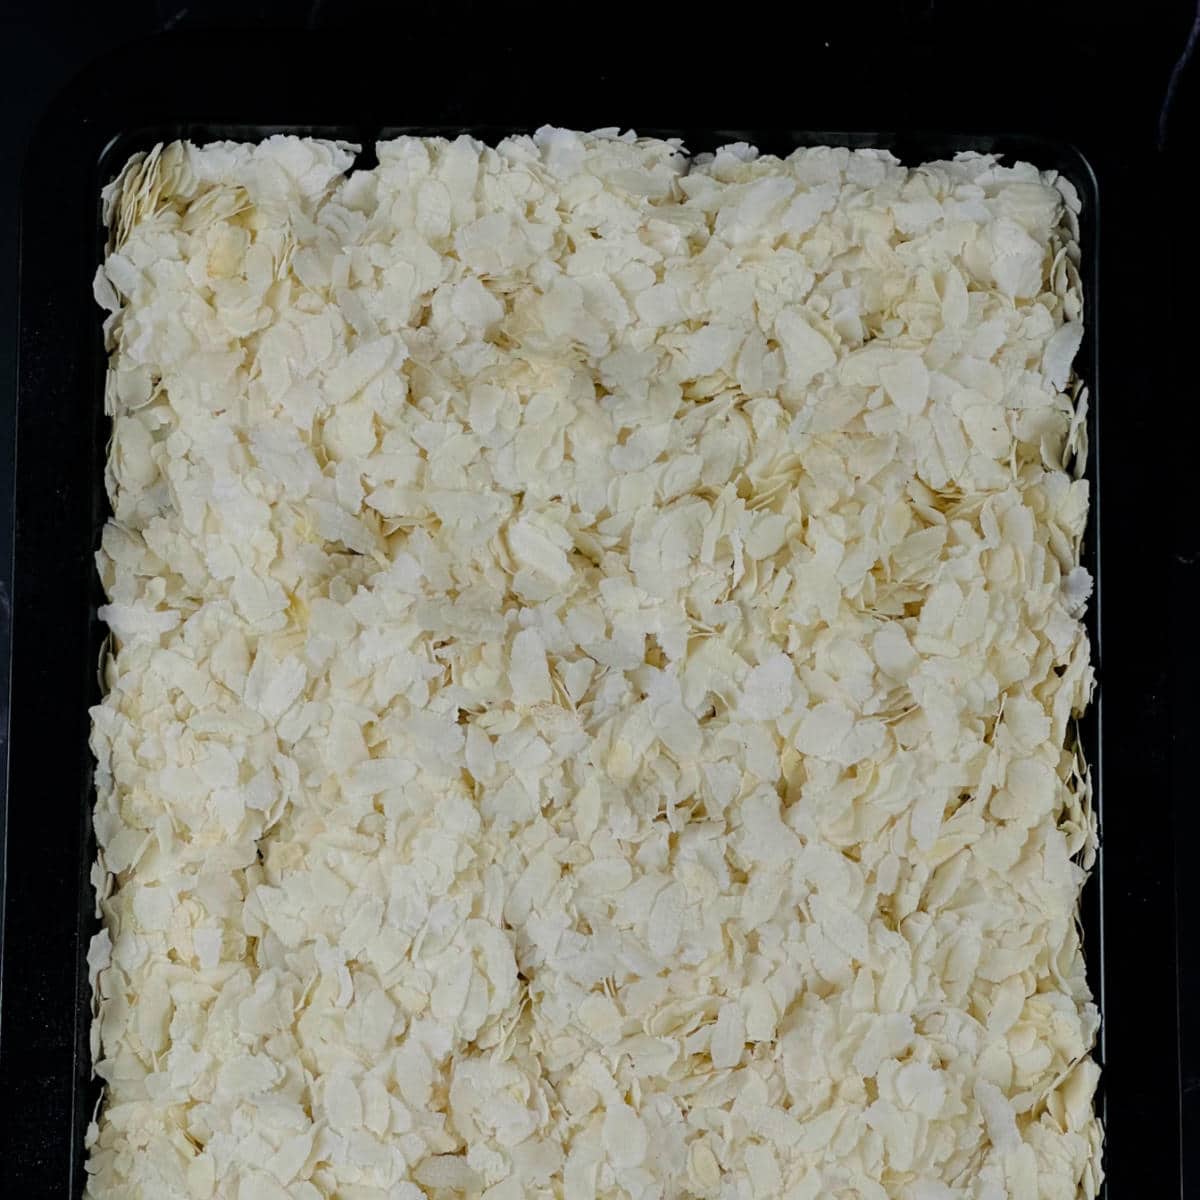 Dry roast the flattened rice in the oven.